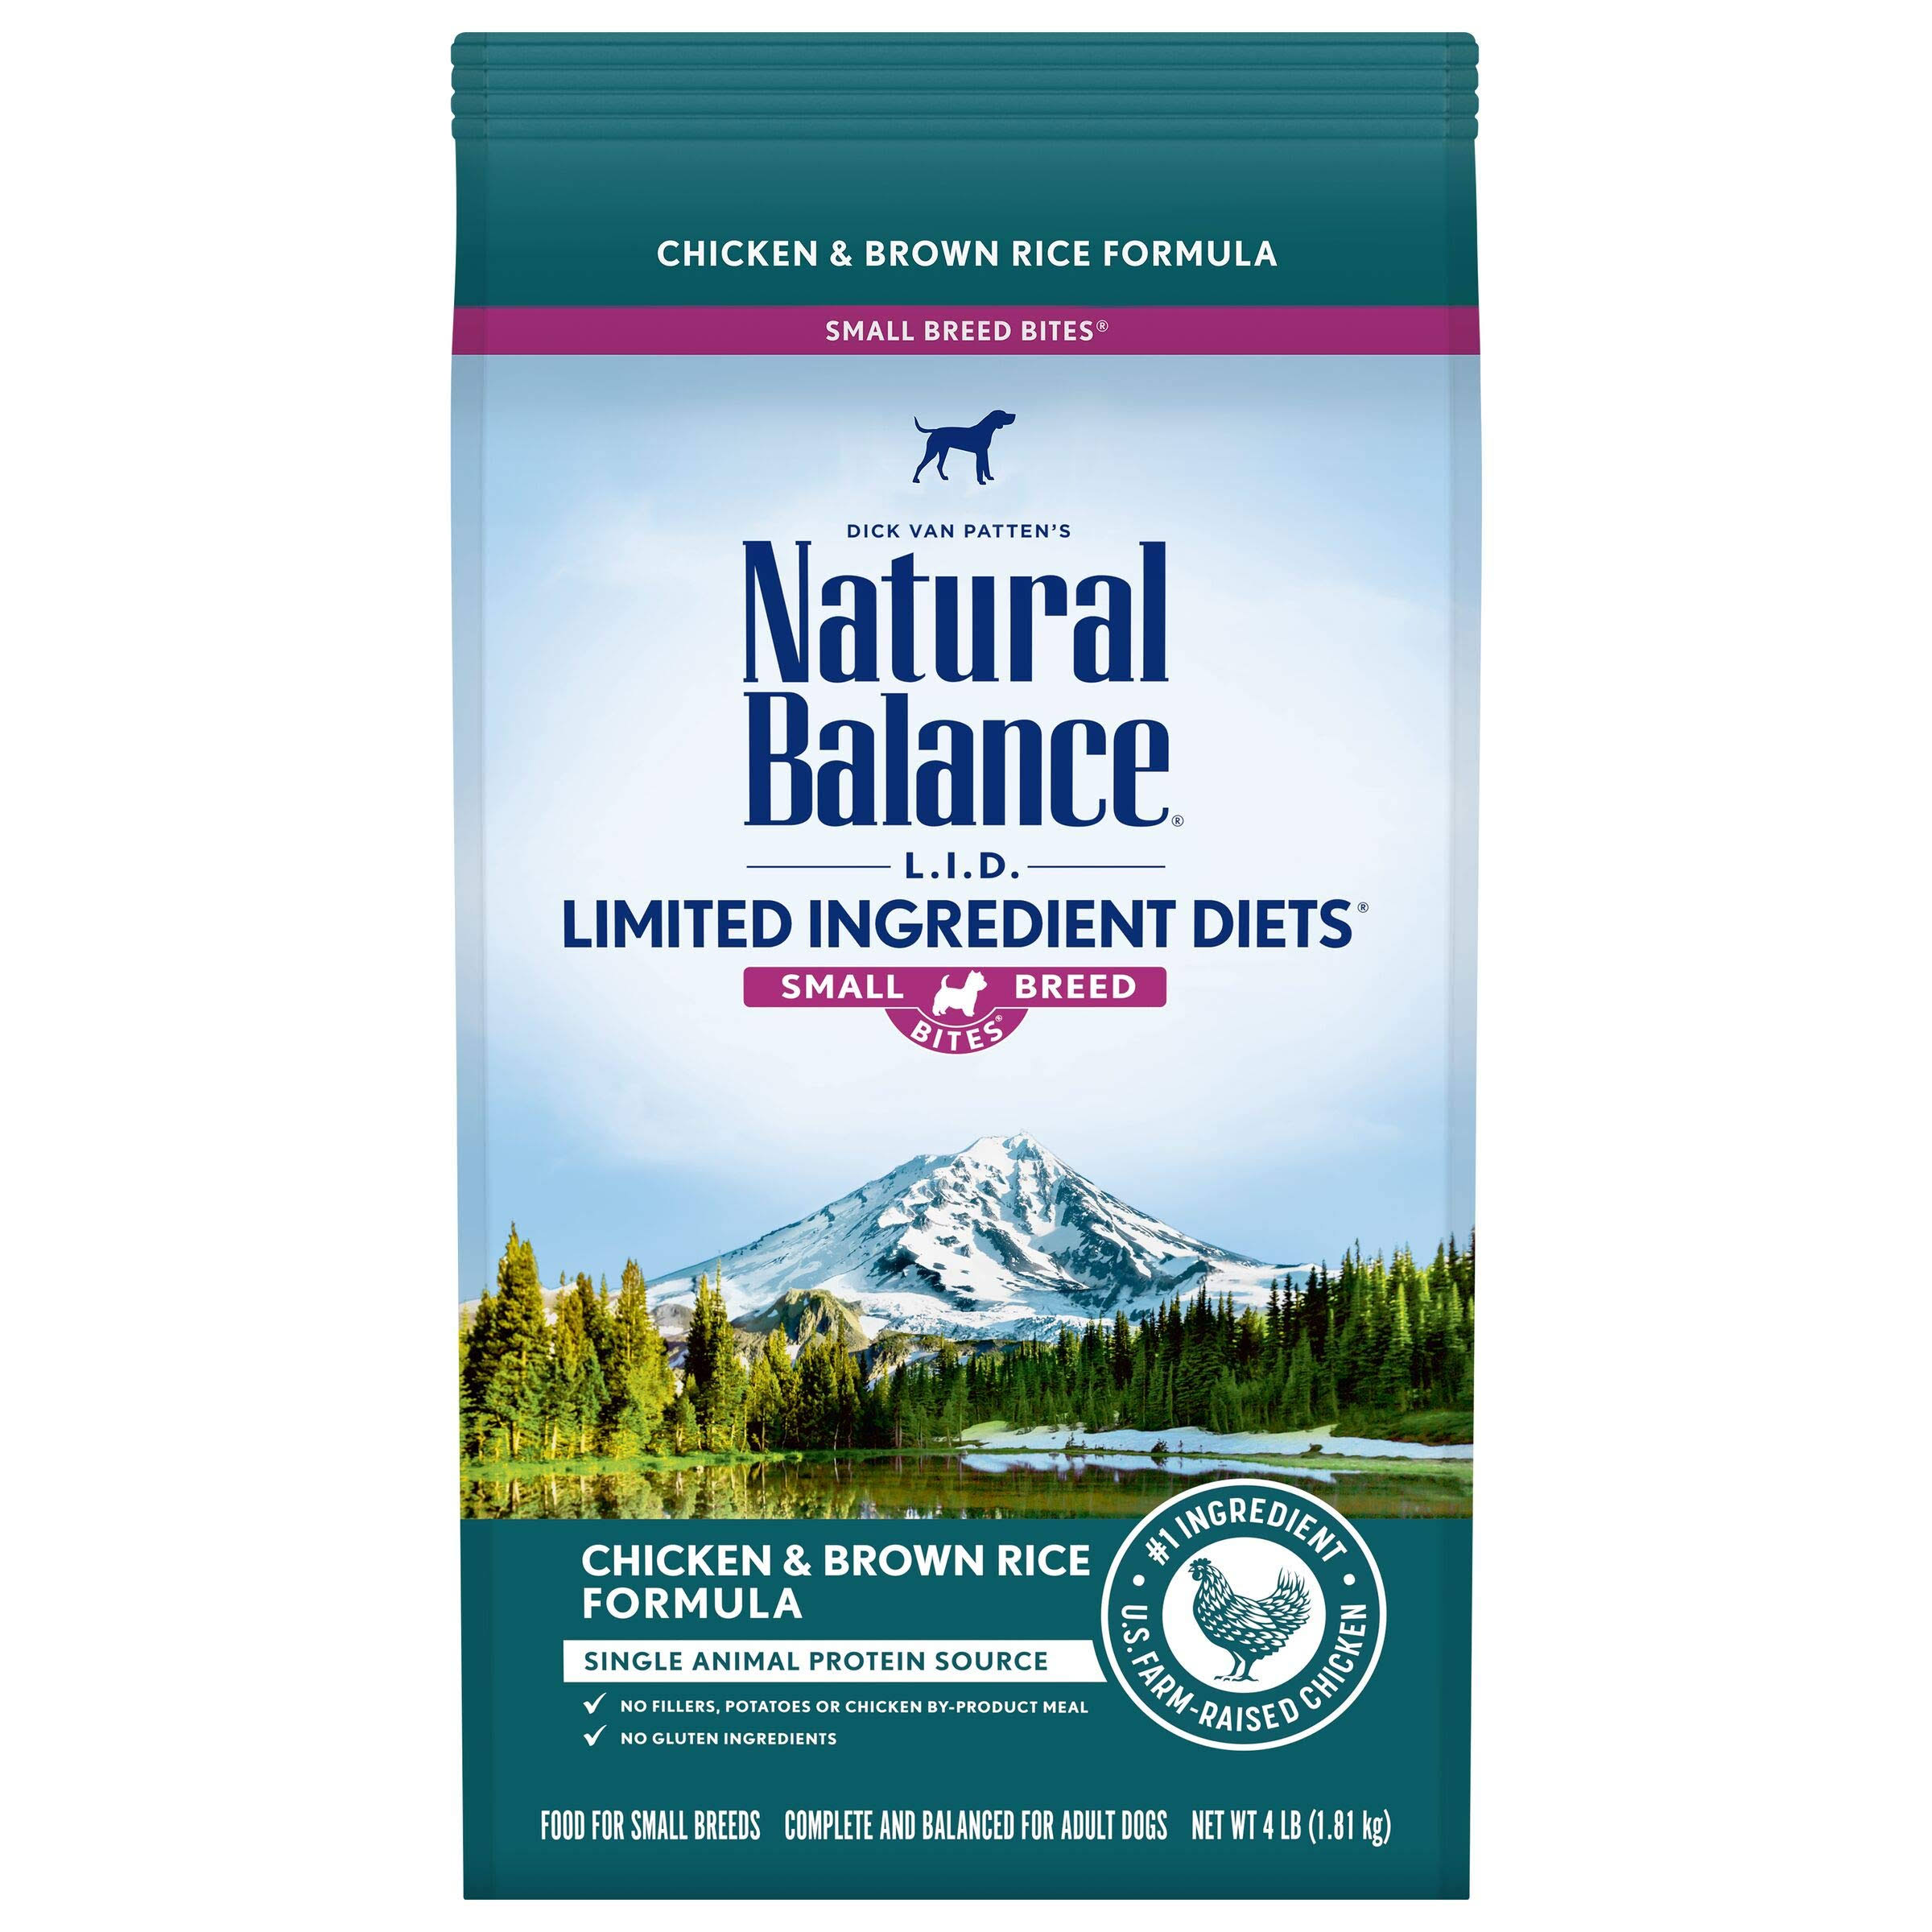 Natural Balance L.I.D. Limited Ingredient Diets Dog Food, Chicken & Brown Rice Formula, Small Breed Bites - 4 lb